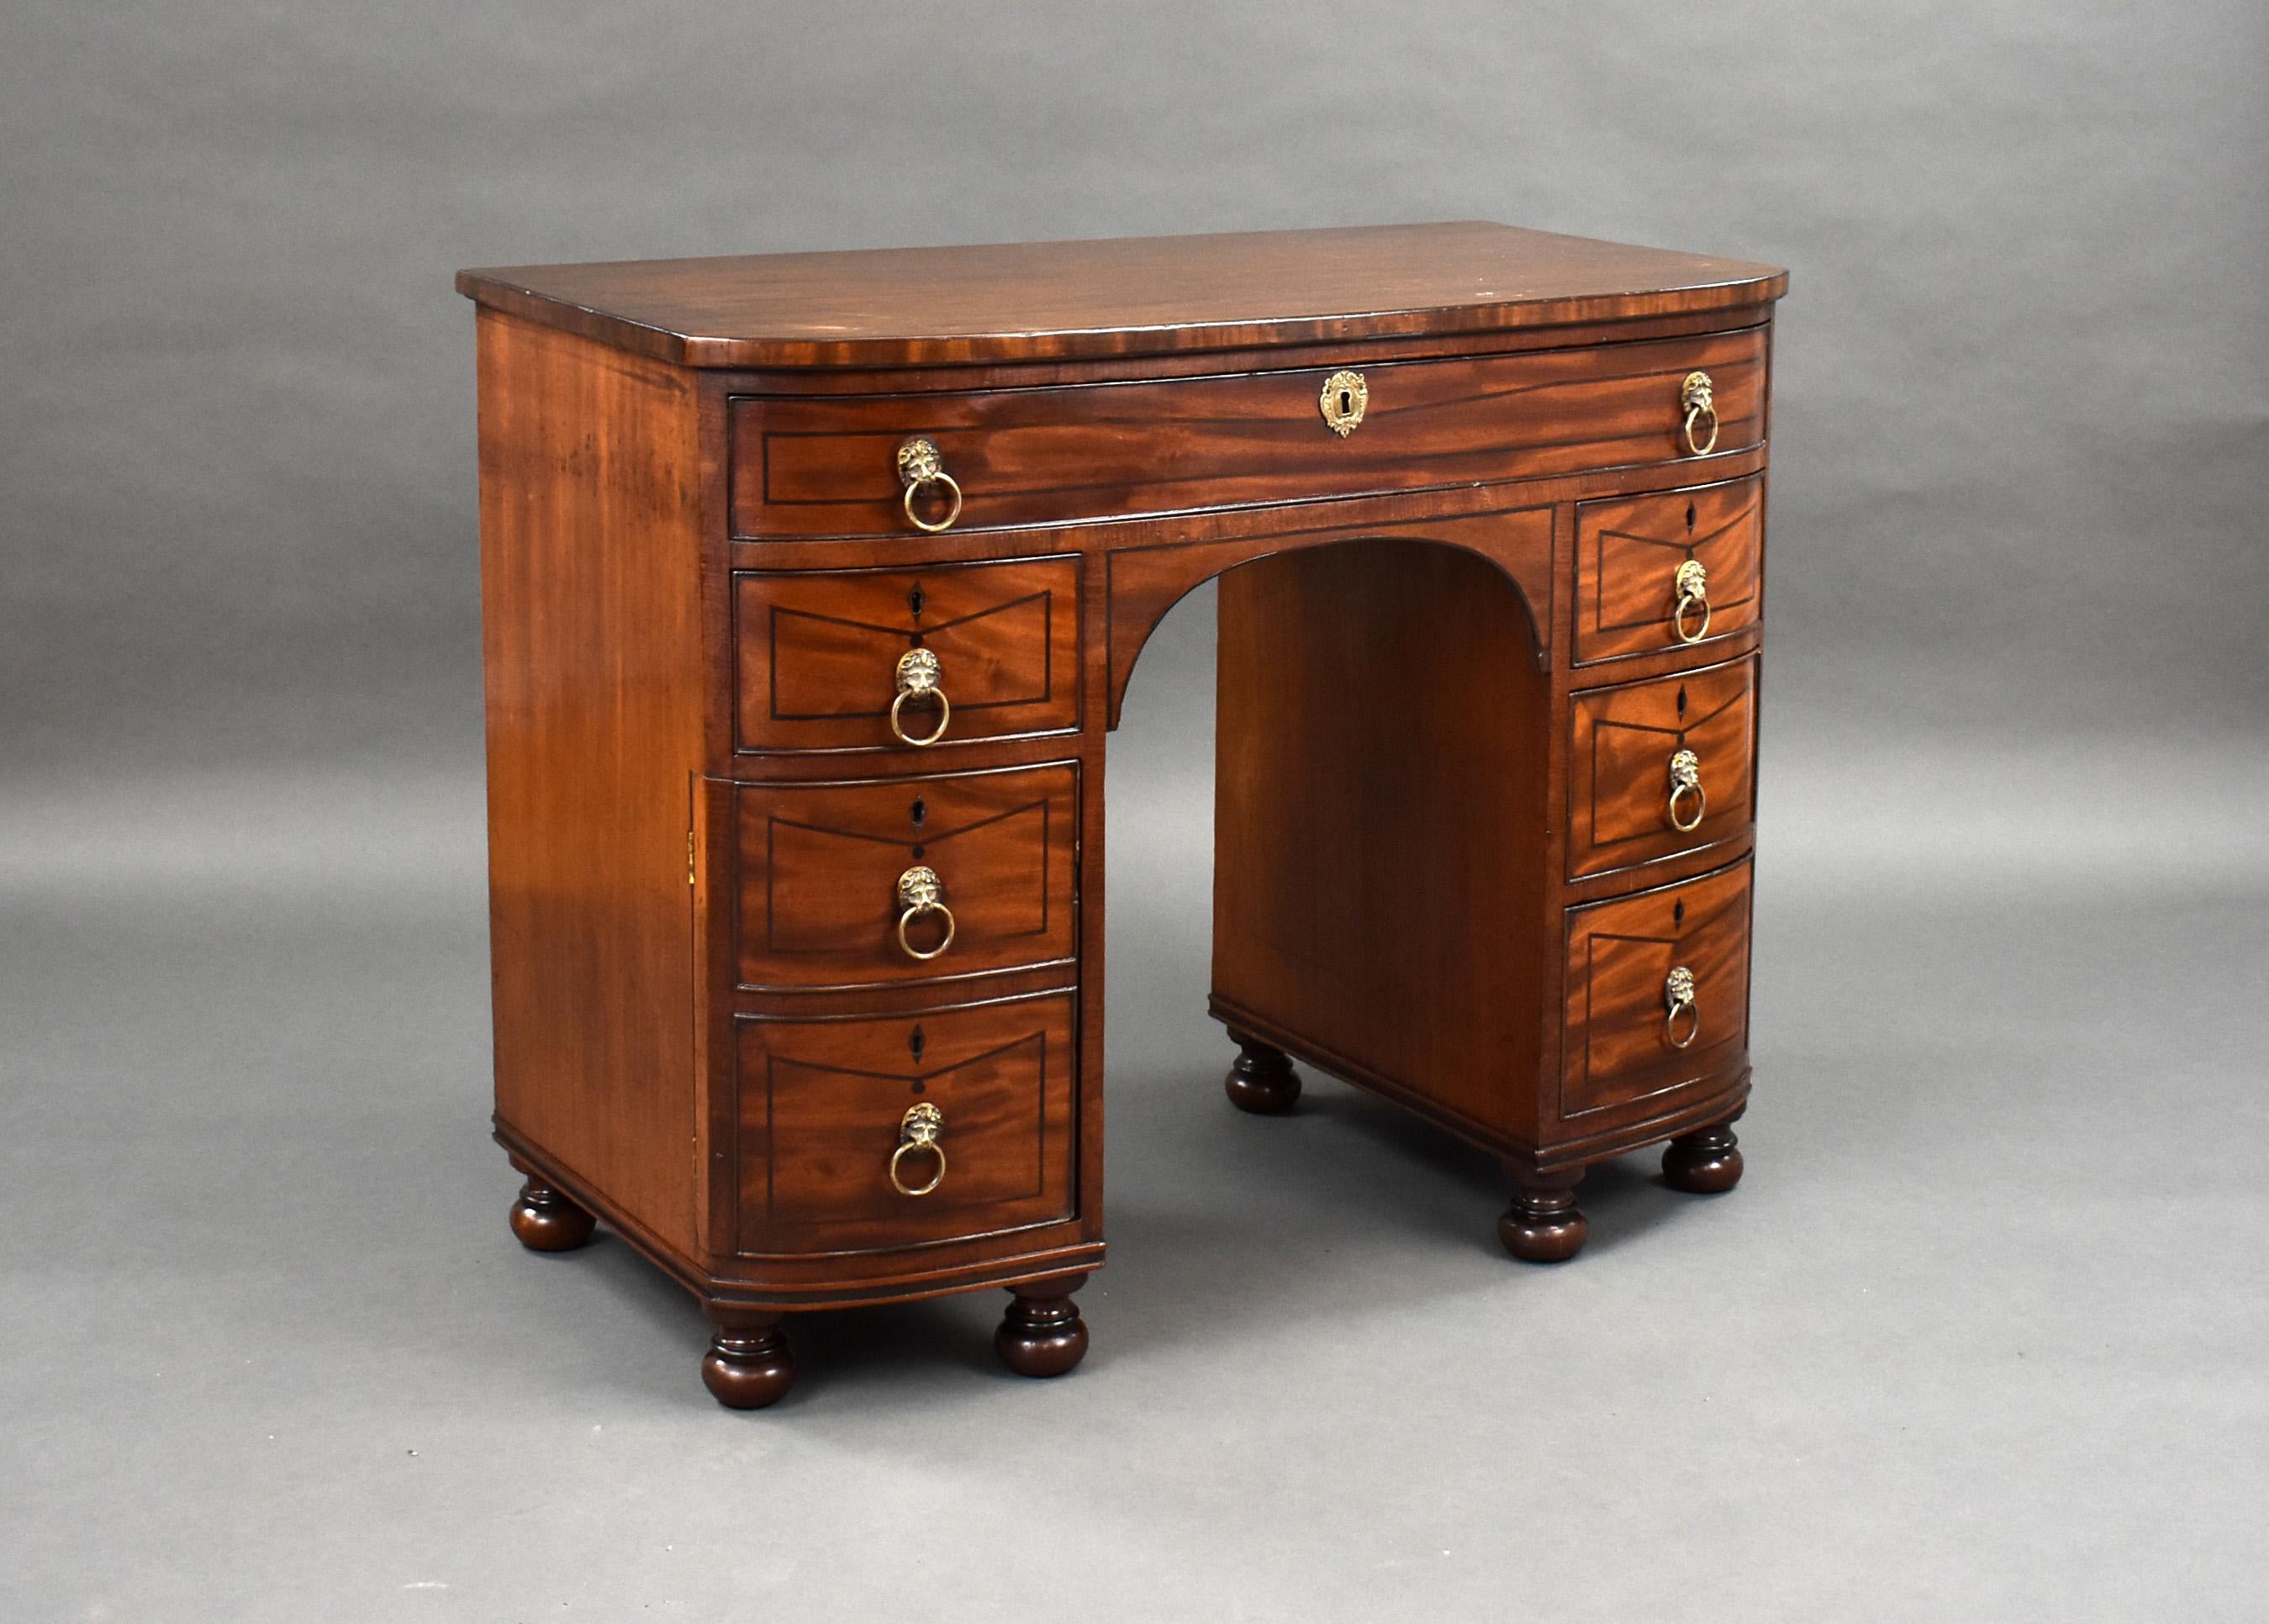 For sale is a fine quality Regency mahogany dressing chest. Having a single drawer to the top, opening to reveal a fully fitted interior including rising vanity mirror. Below this, the left hand side has another drawer above a cupboard and on the